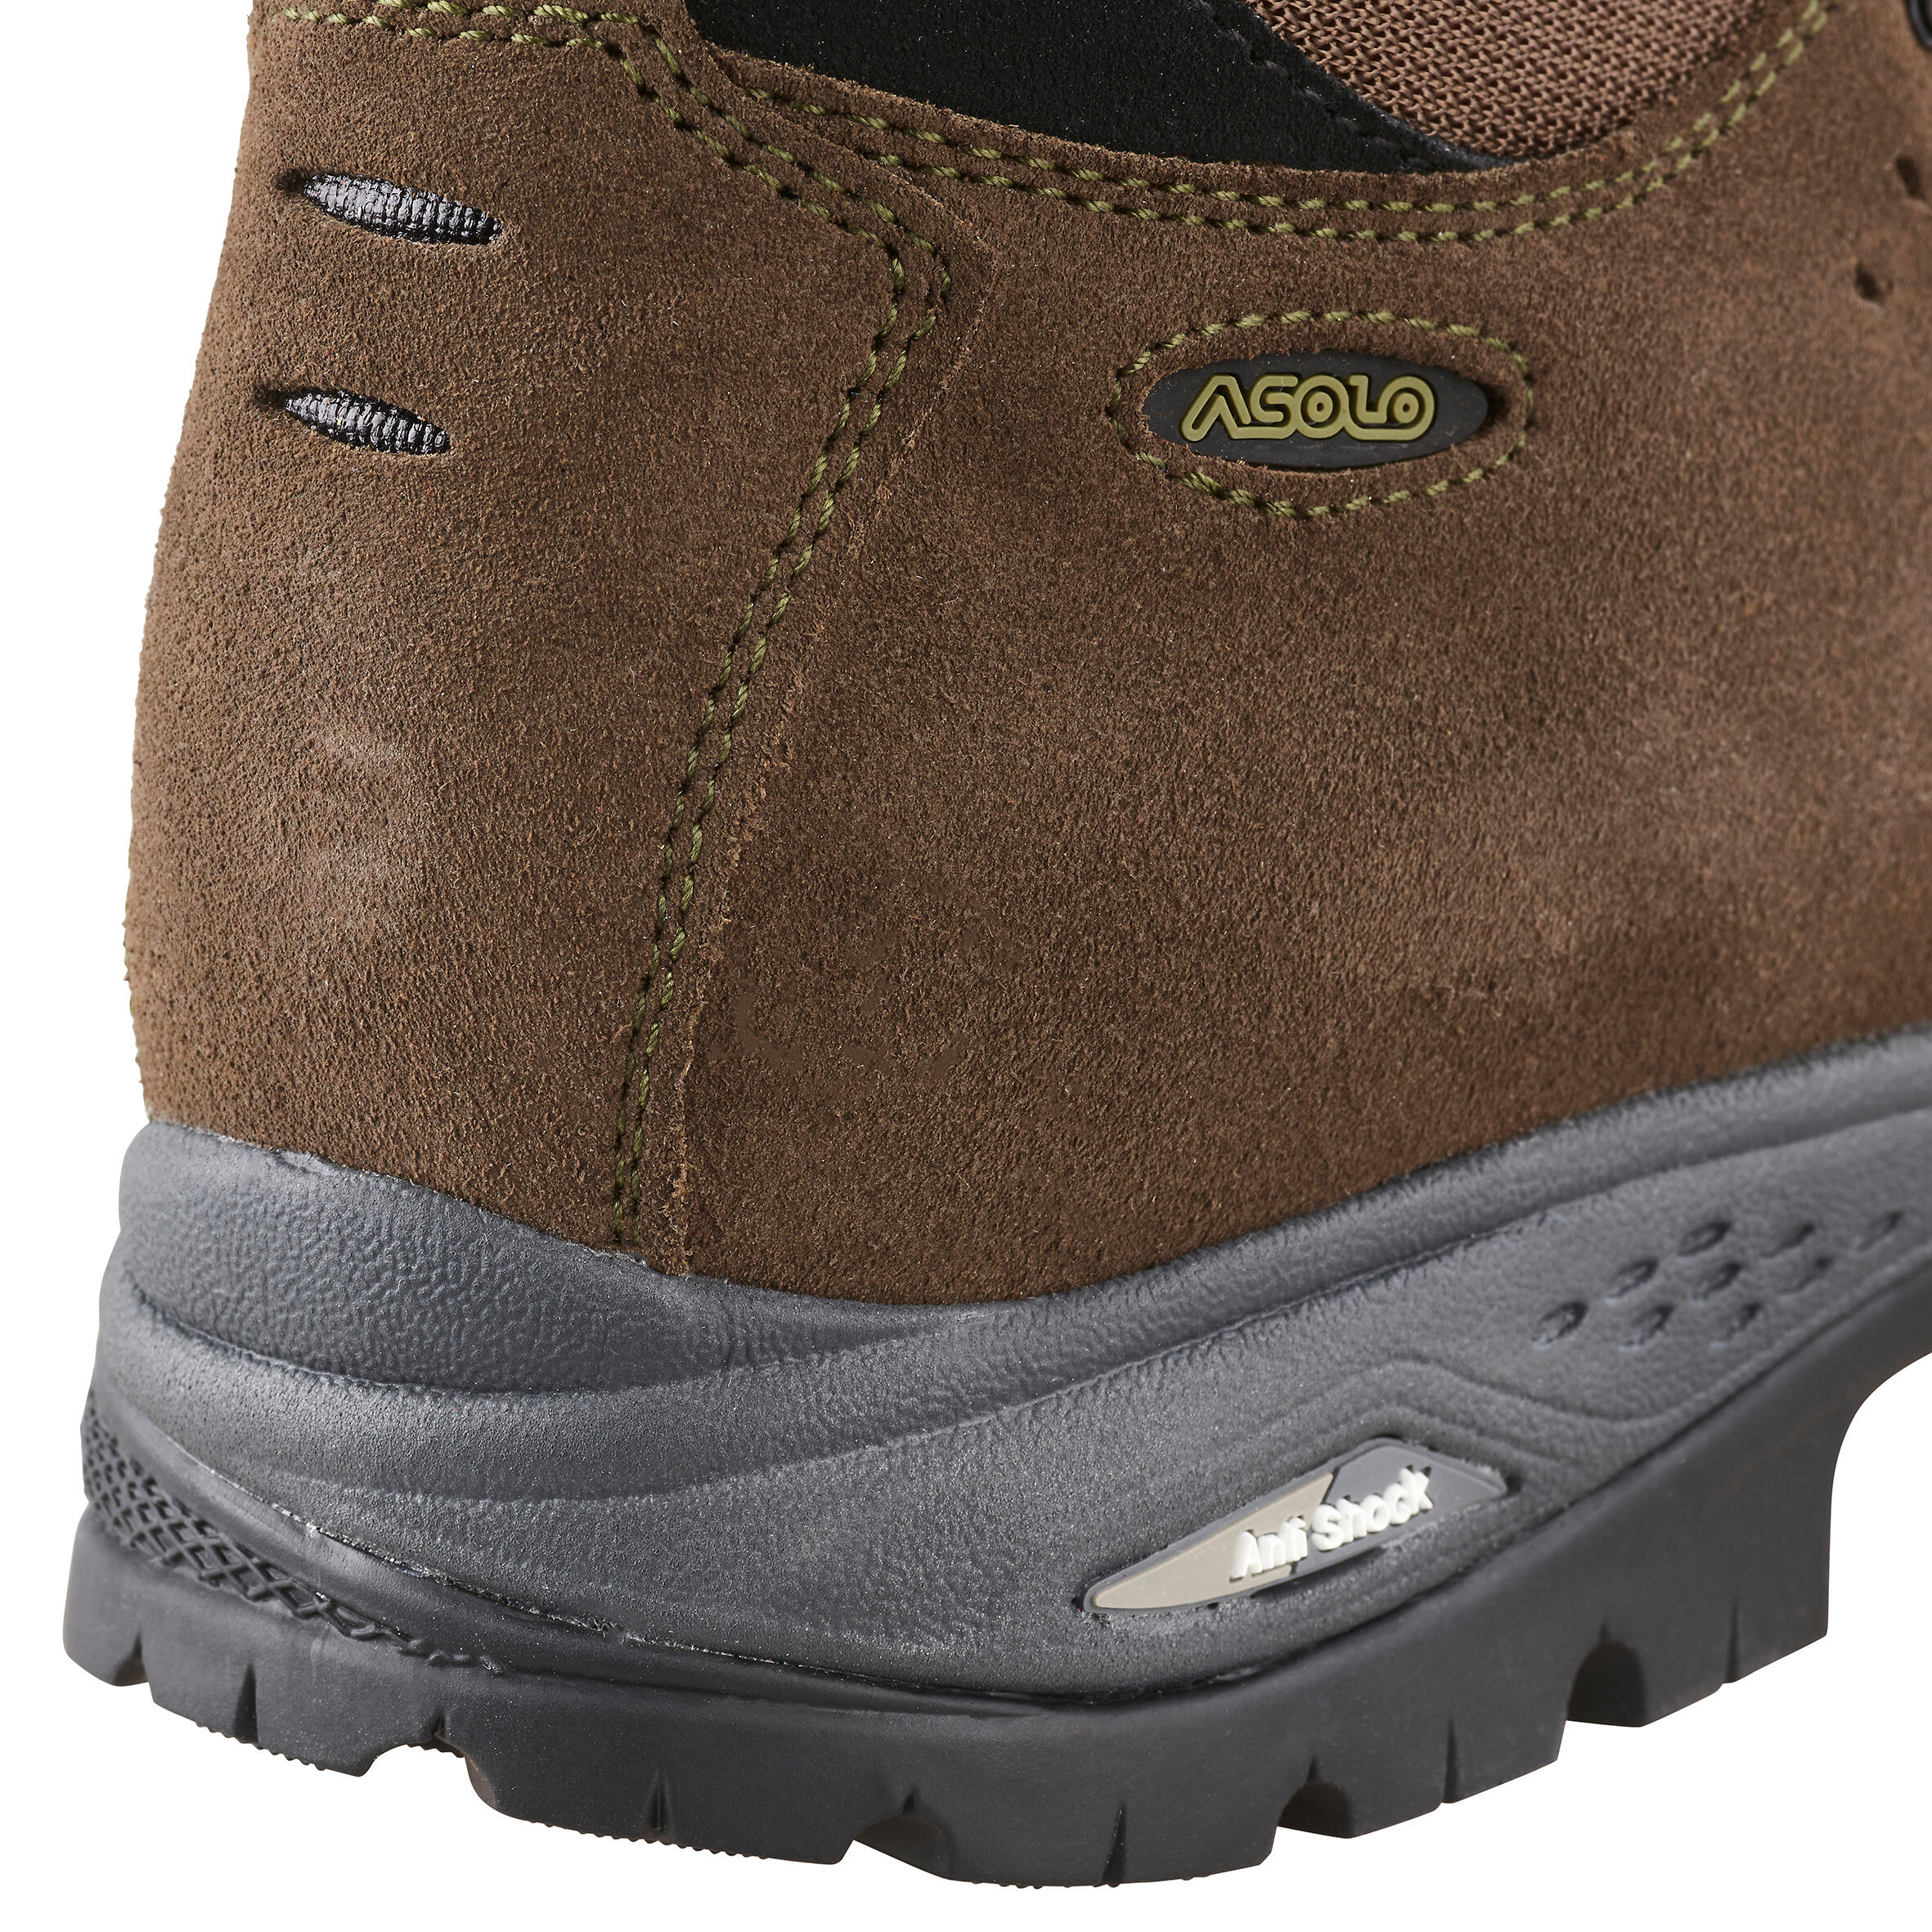 Waterproof Country Sport Boots Asolo X-Hunt Forest Gore-Tex Vibram 13/14